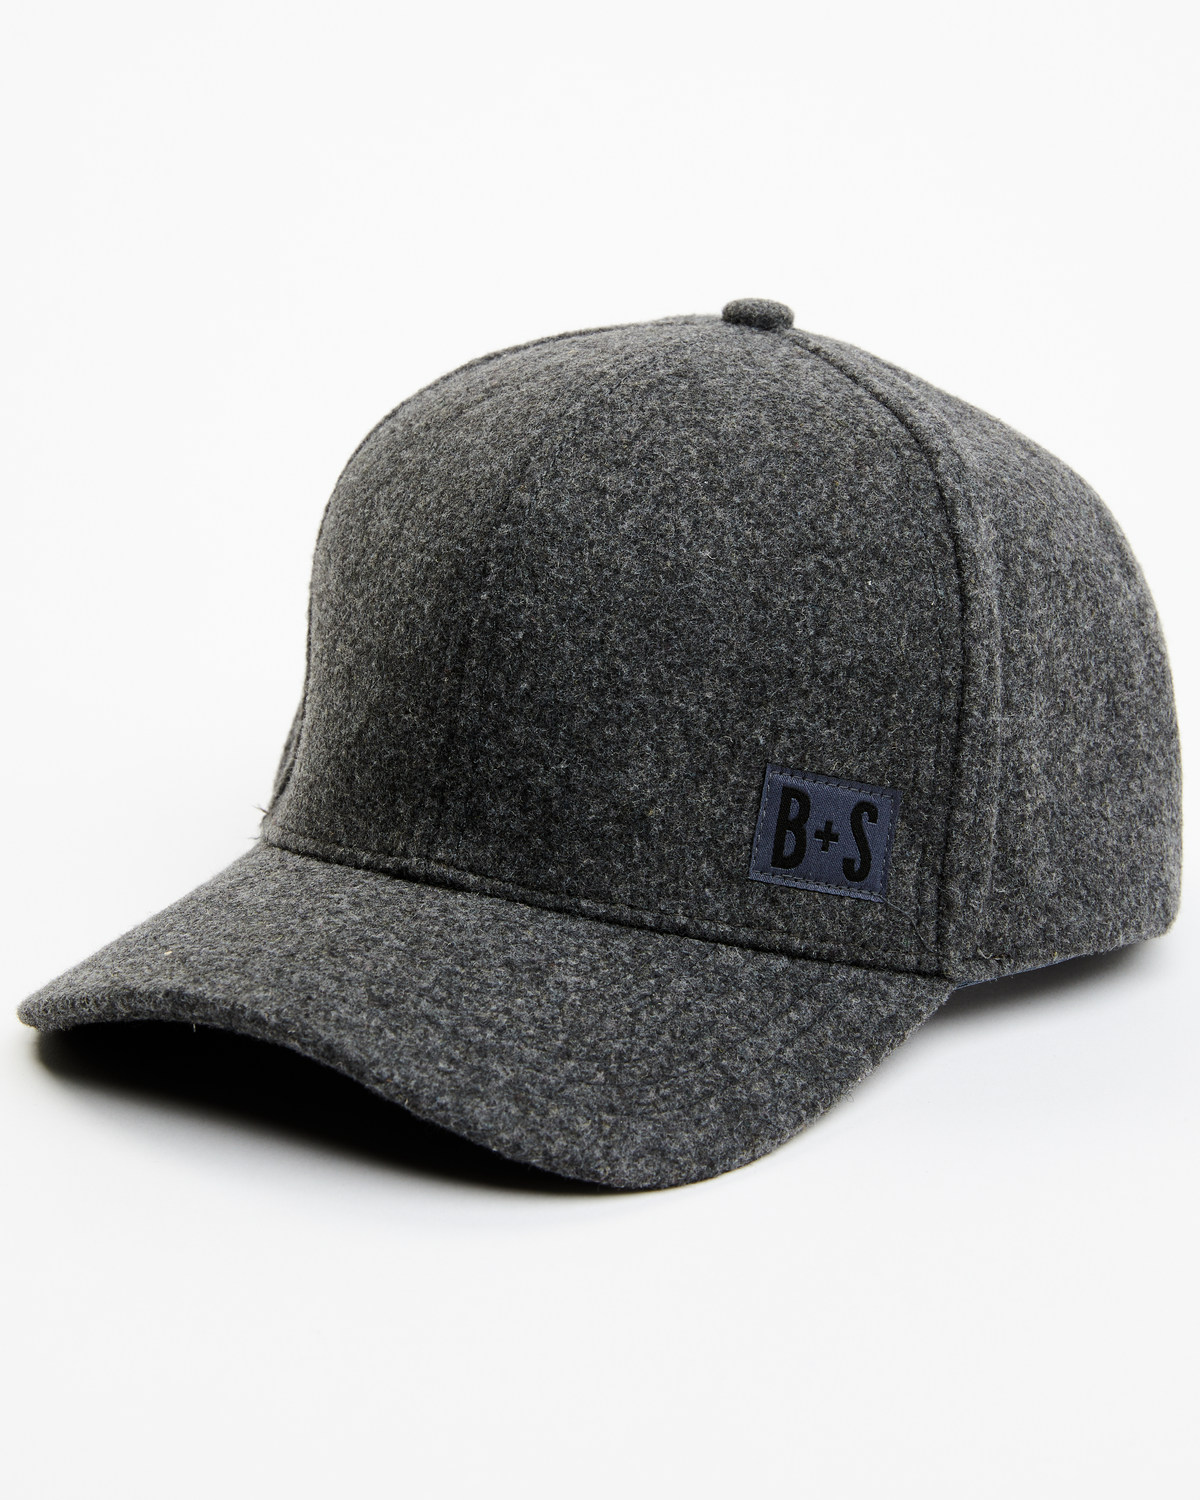 Brothers and Sons Men's Small Logo Ball Cap